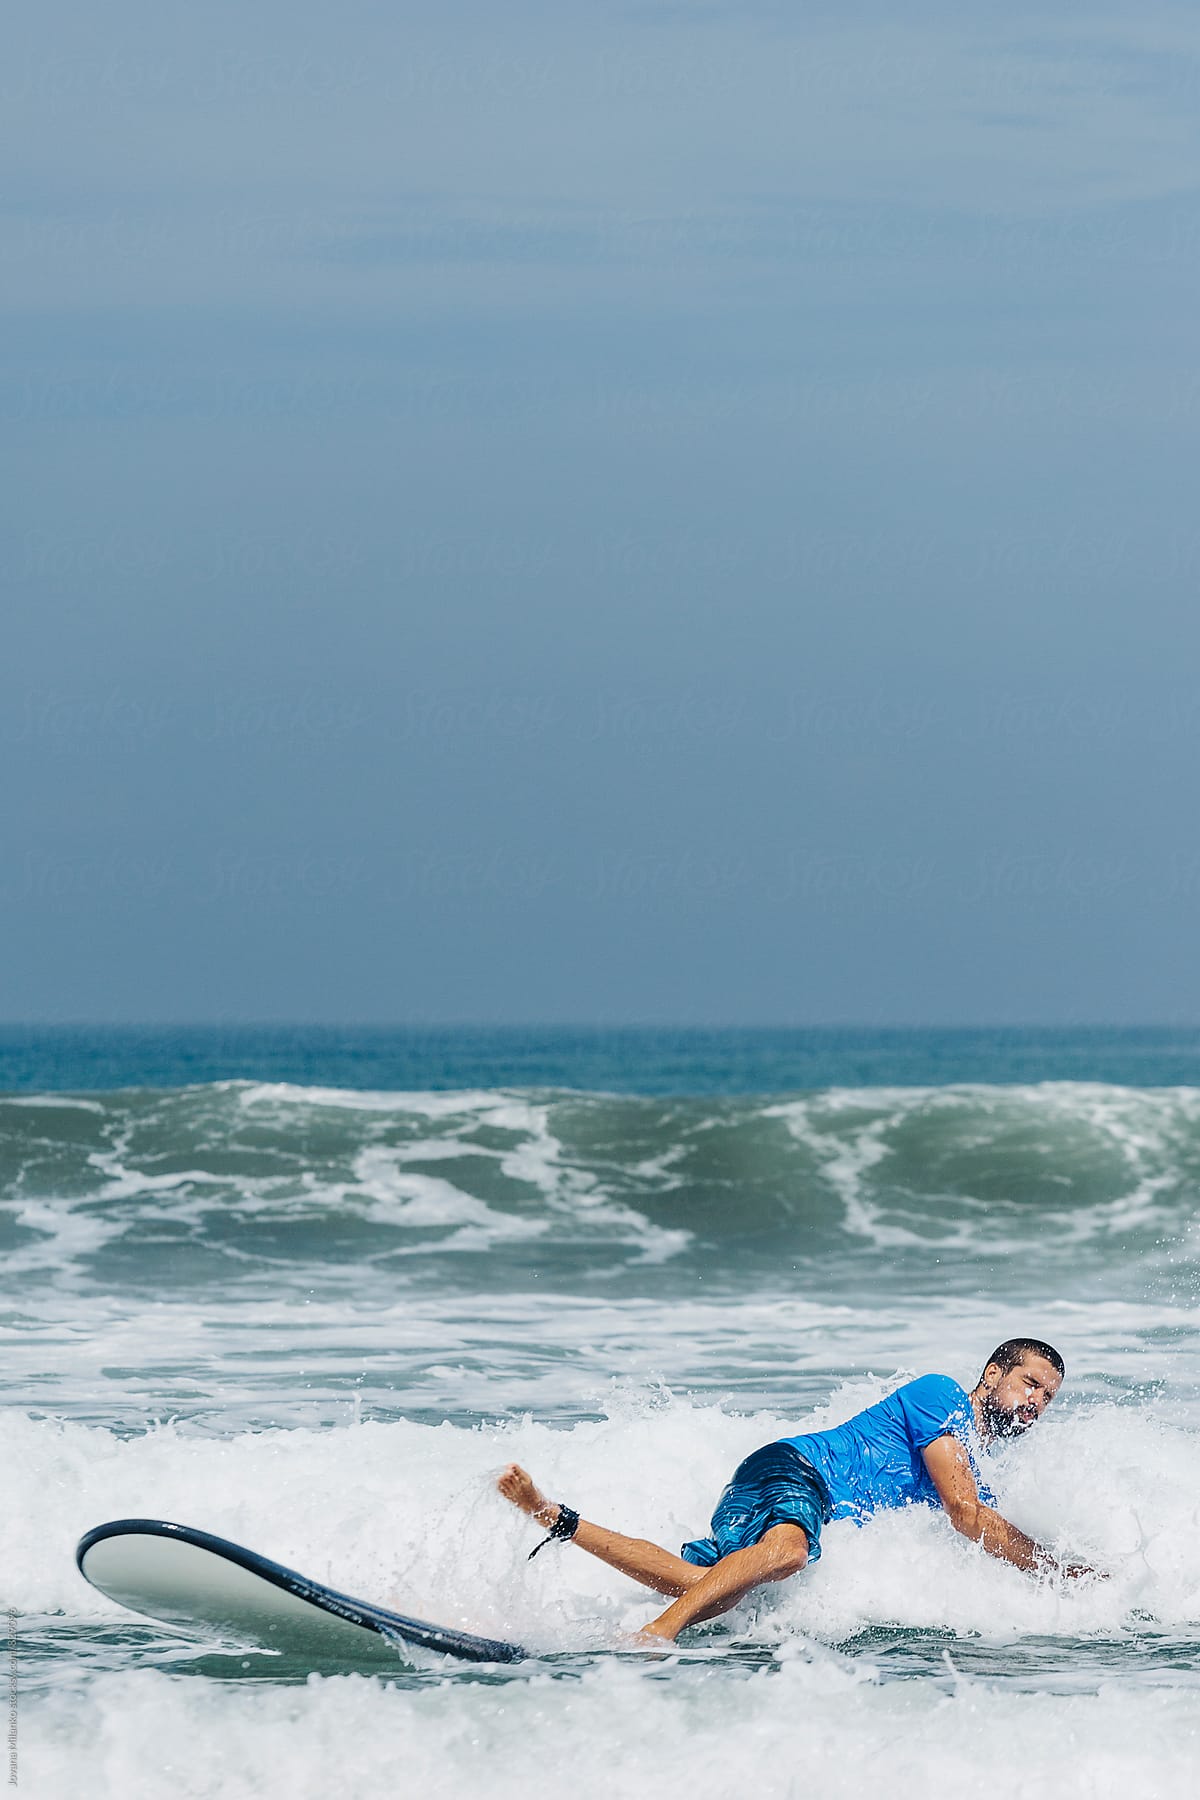 Young man falling in water while learning to surf the waves